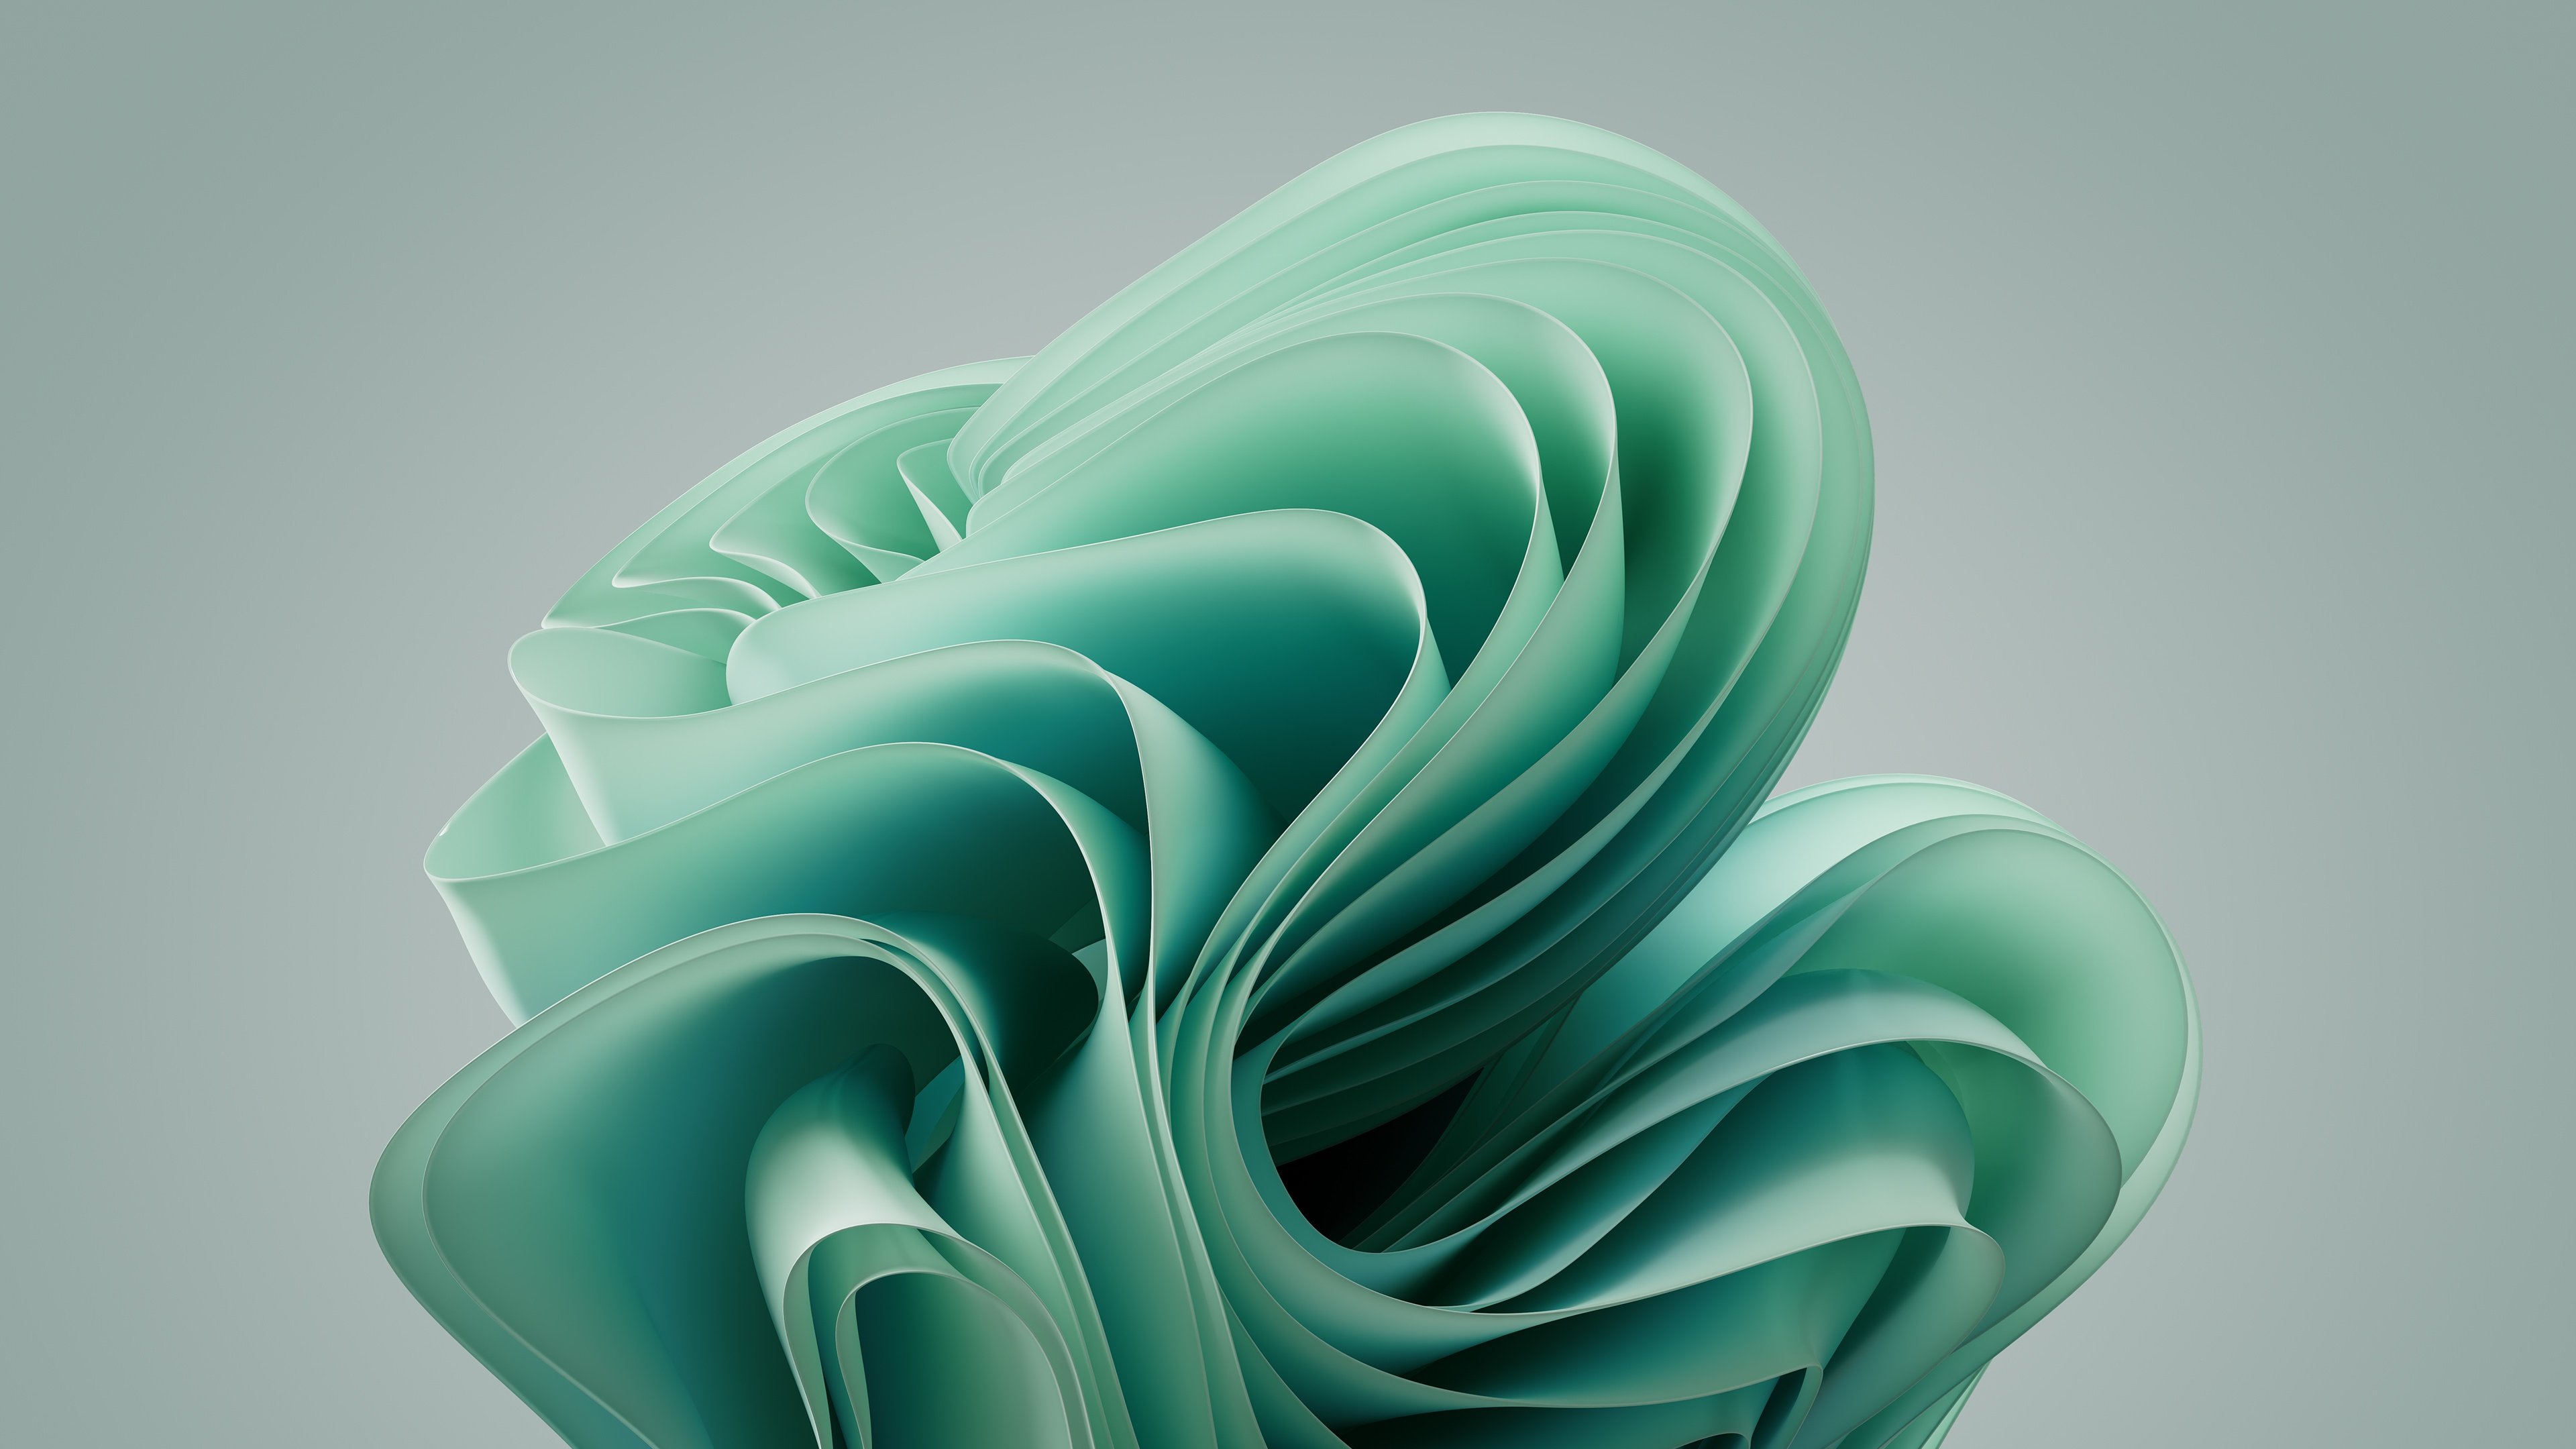 Surface Lap Wallpaper 4K, Teal abstract, Stock